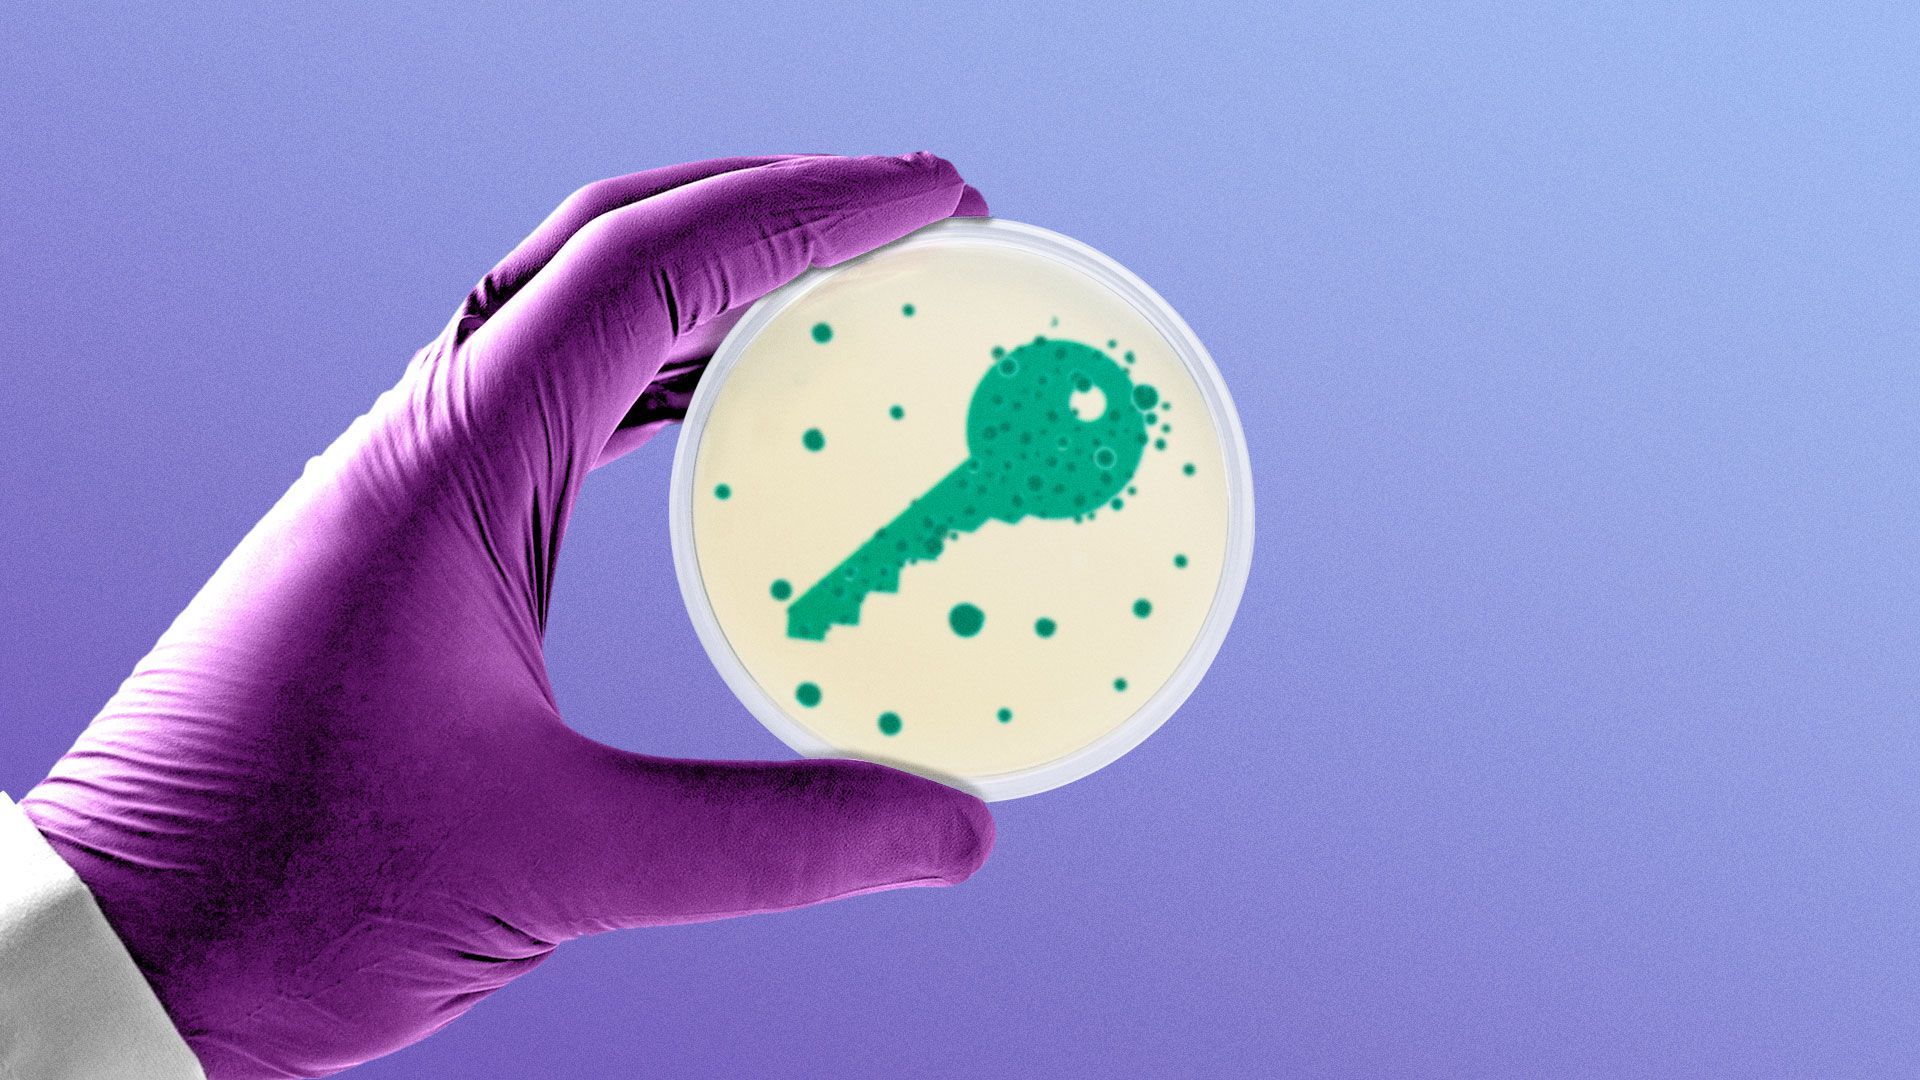 Illustration of gloved hand holding a petri dish with a key